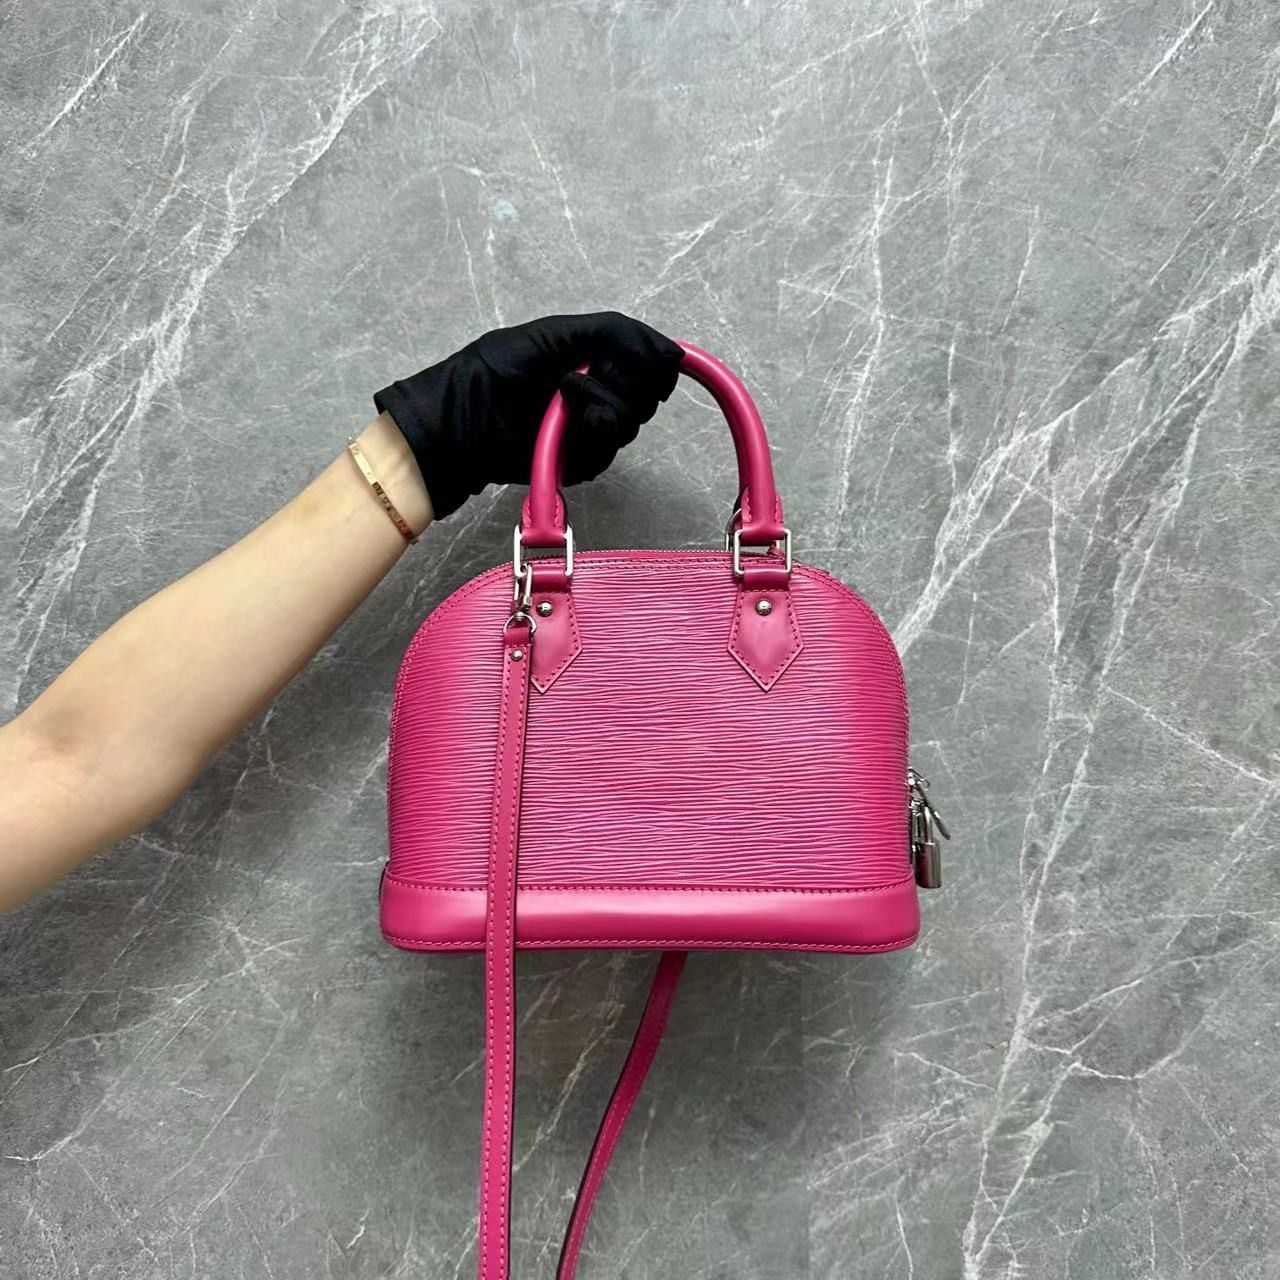 Louis Vuitton Alma pm Epi leather in Fuschia review and what fits in it! 